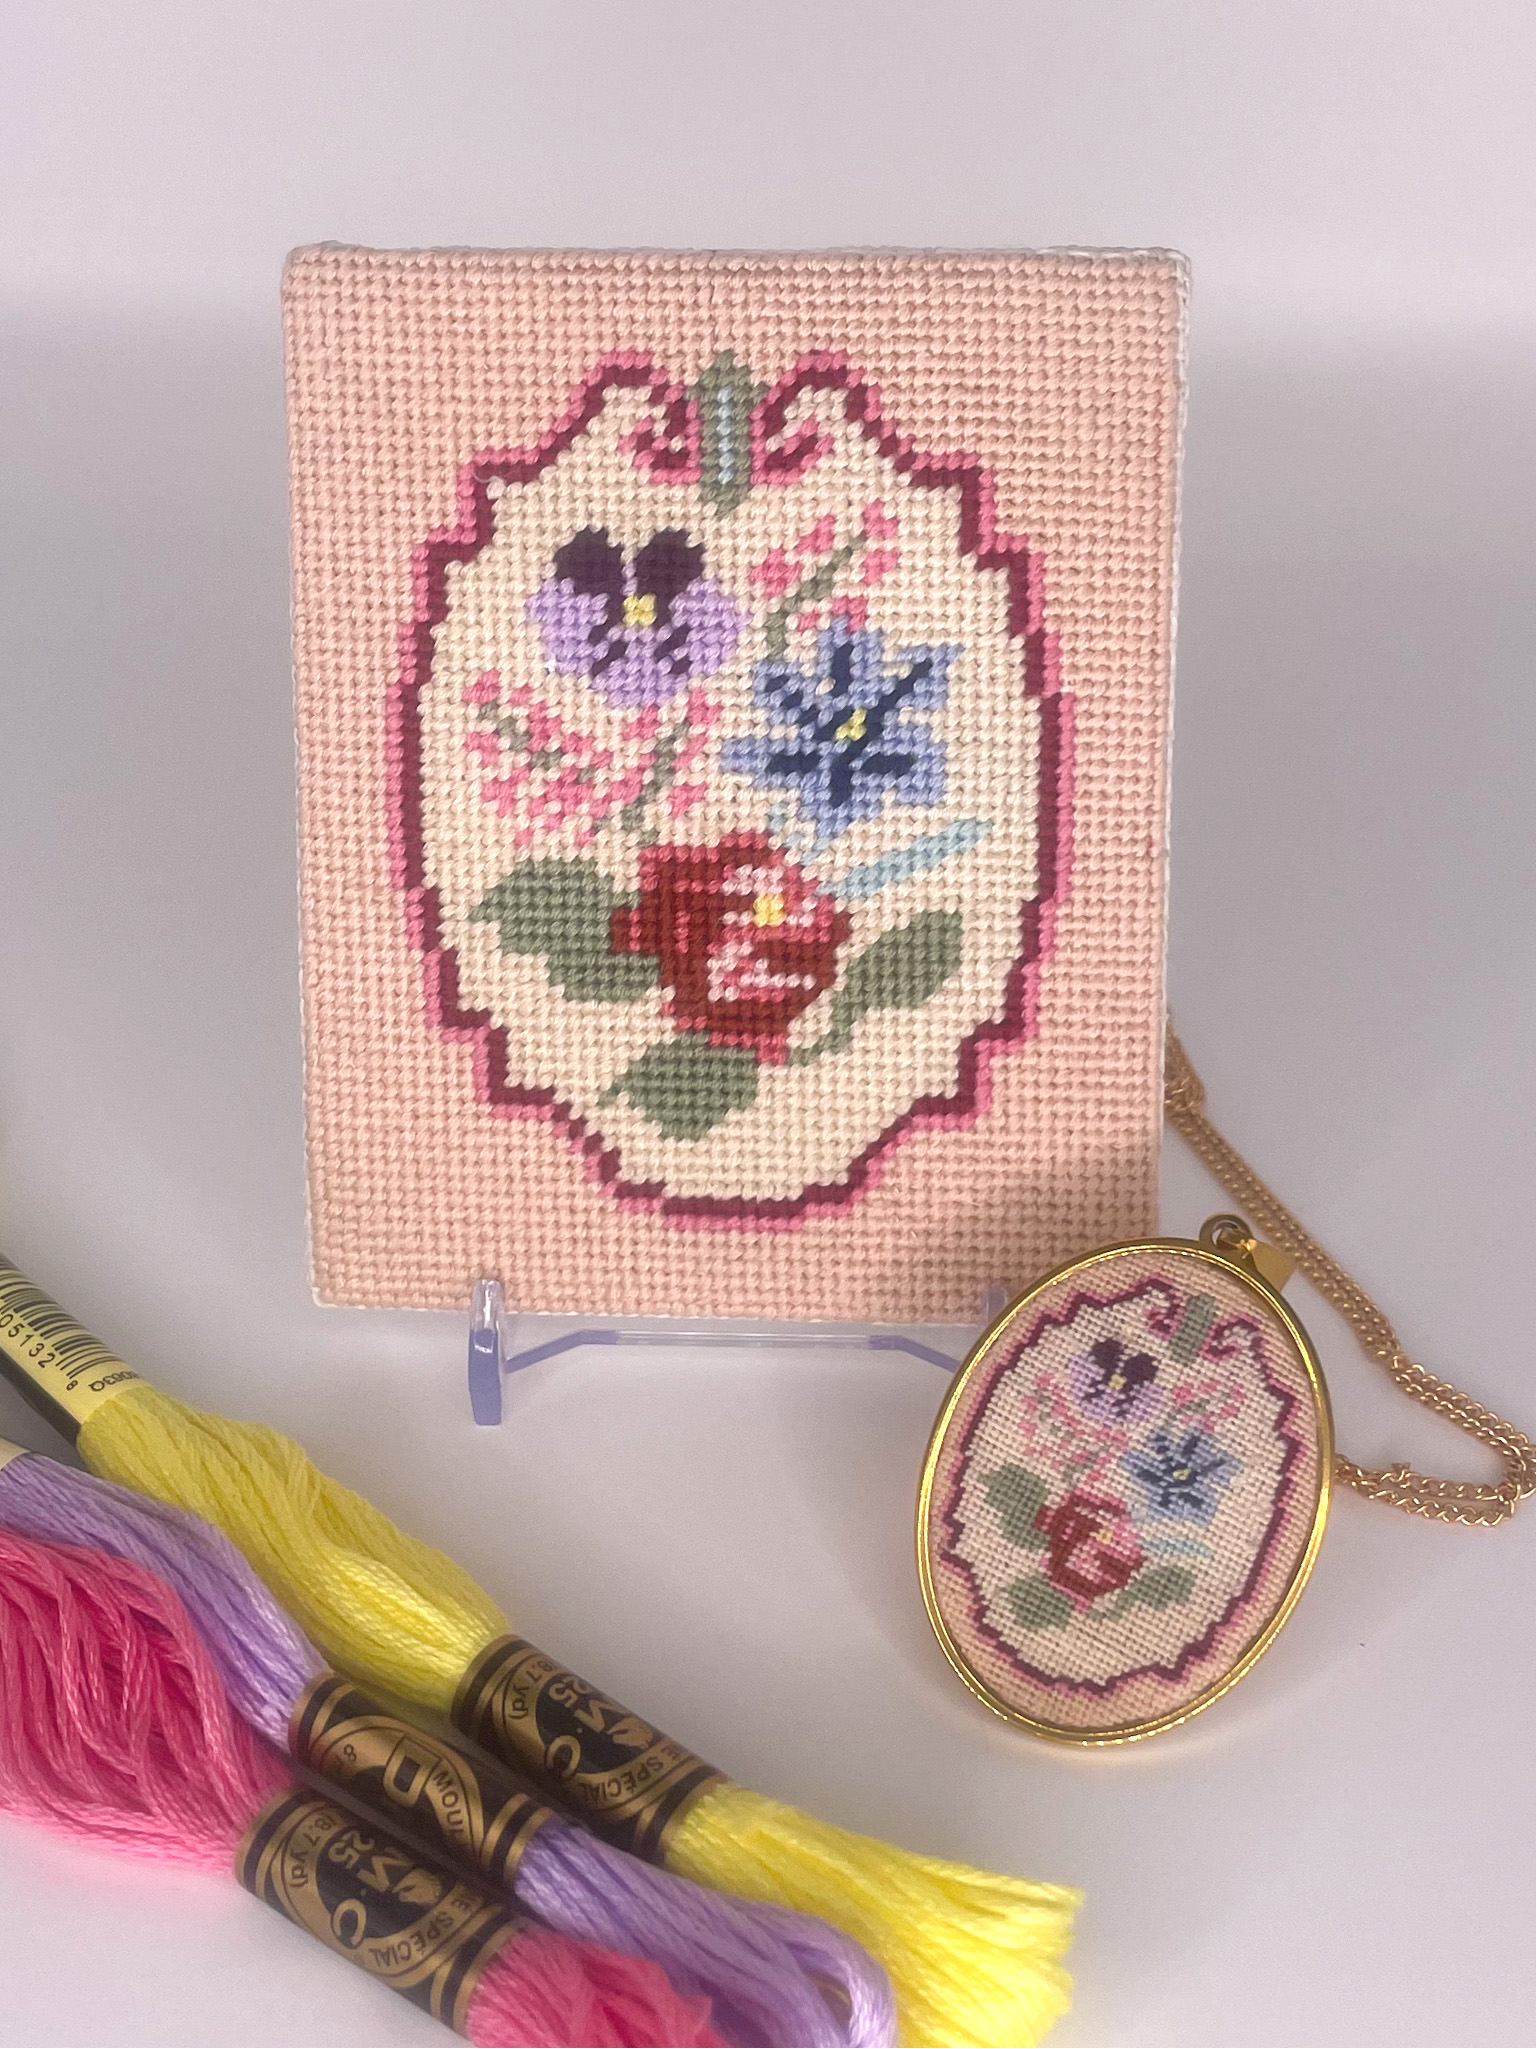 Wildflower posy motif that students will be taught to stitch in this course.